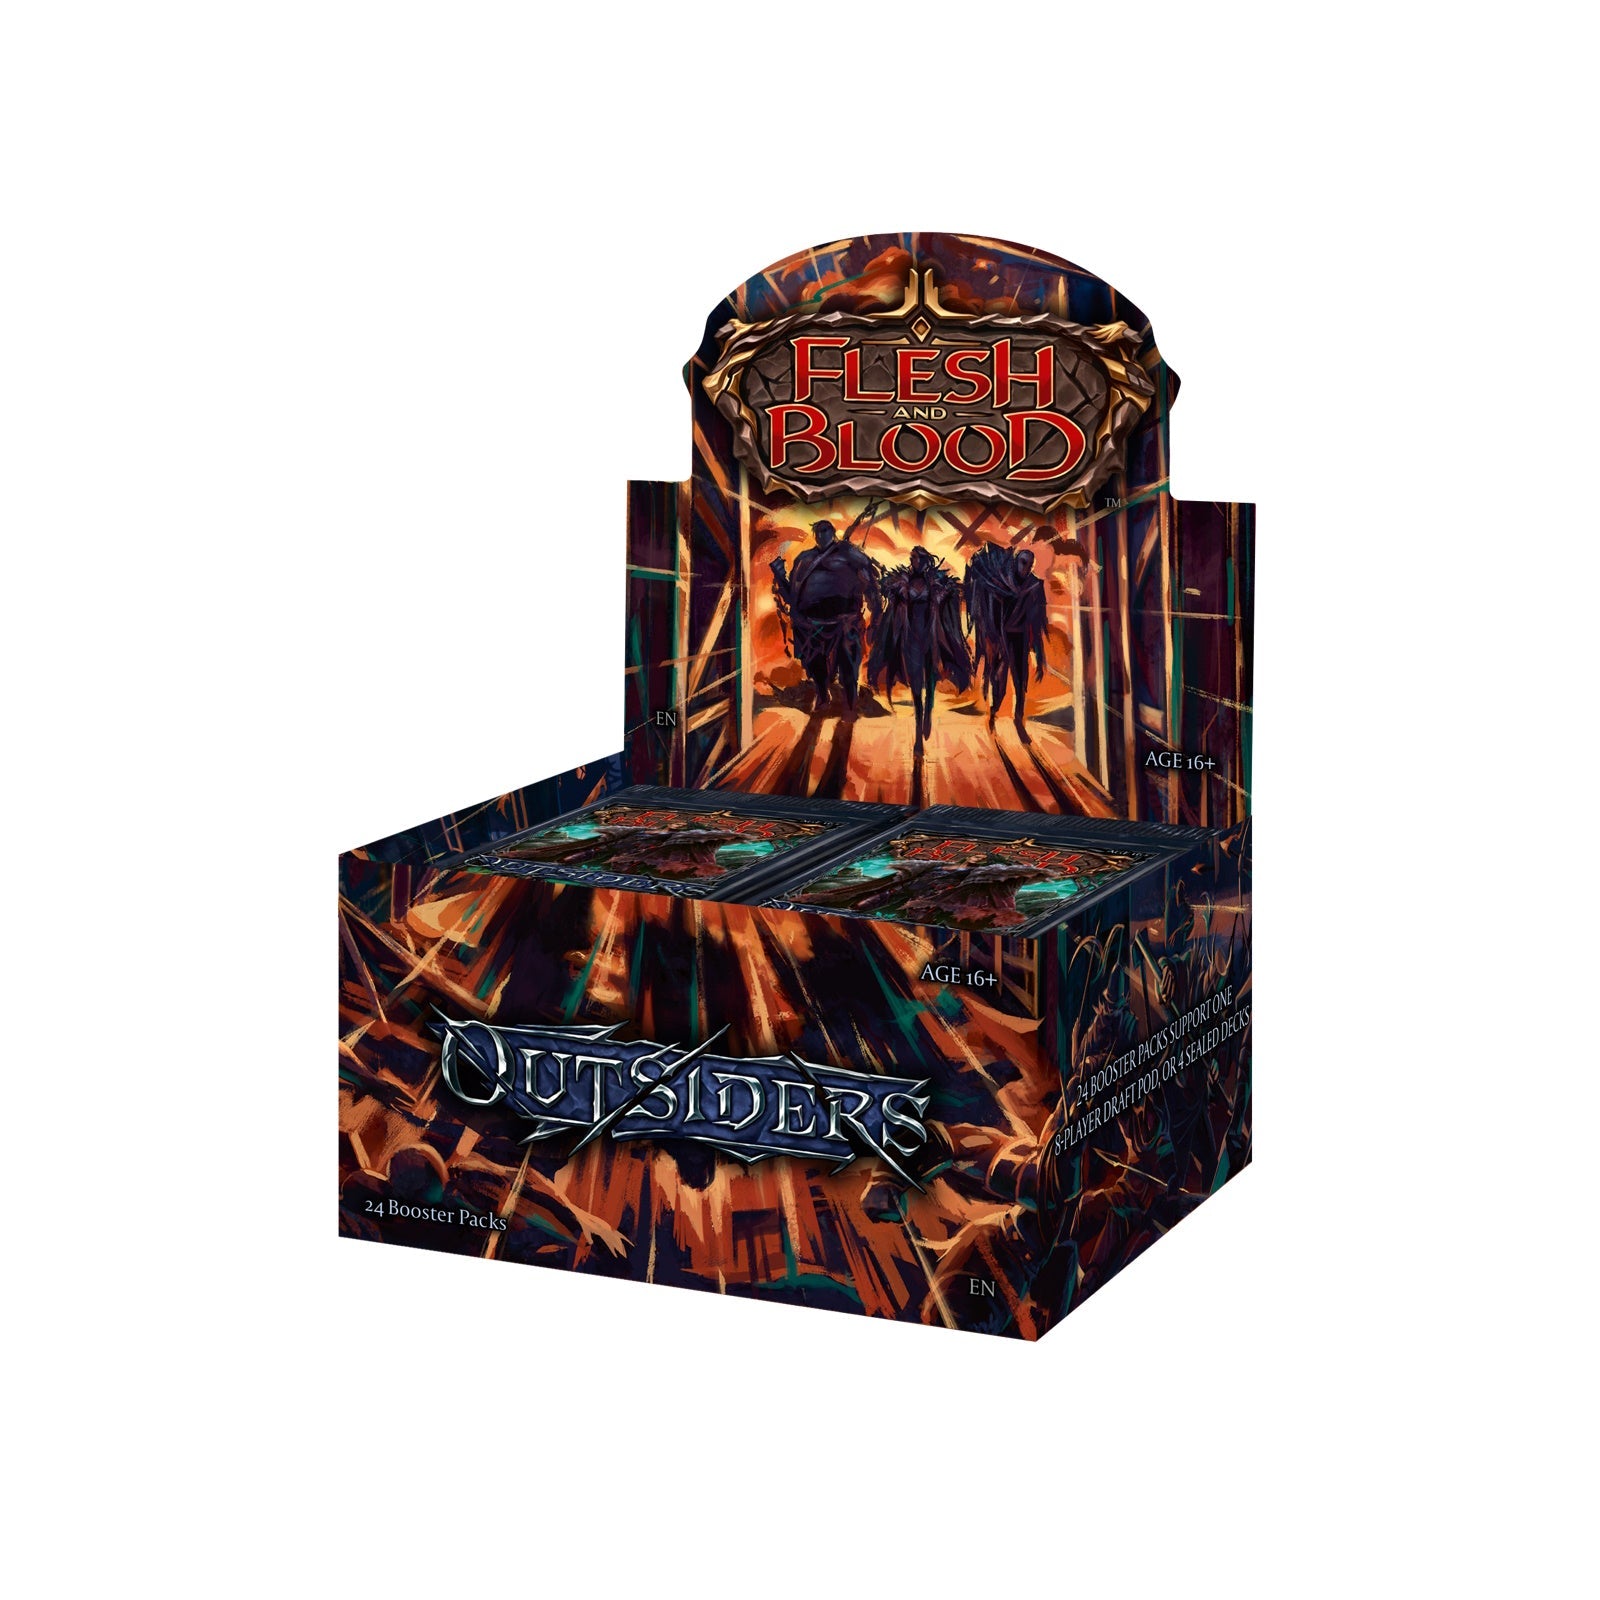 Flesh and Blood Outsiders - BOX of 24 Booster Packs